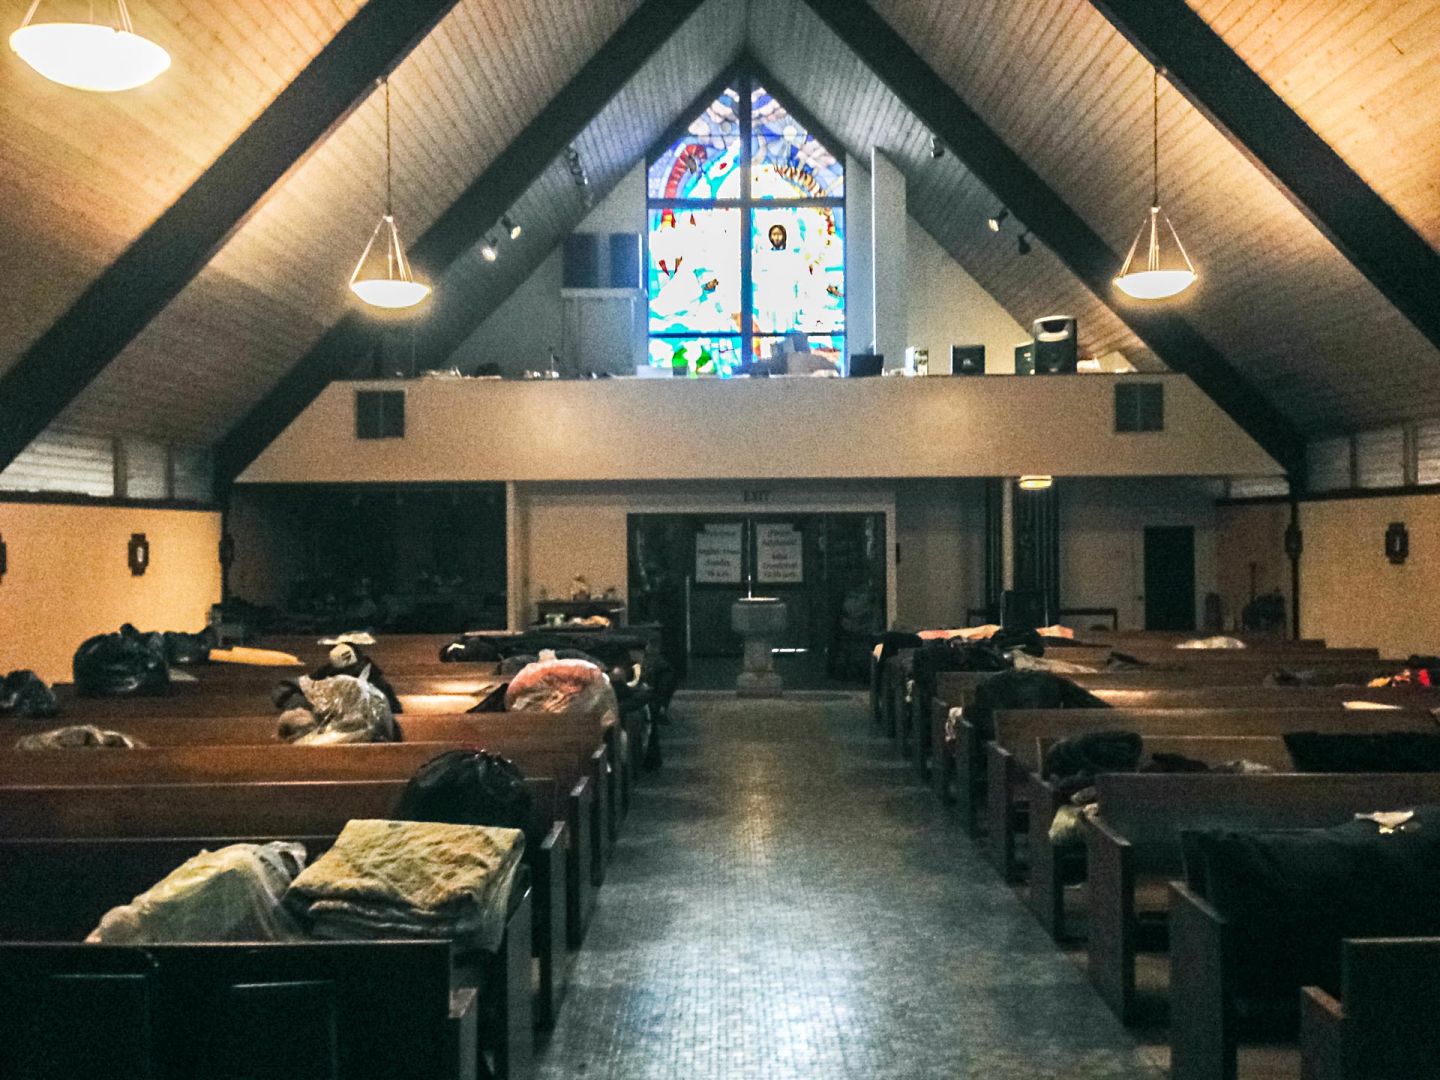 About 30 people sought shelter from wet winter storms last week inside the sanctuary at All Souls Episcopal Church in L.A.’s Highland Park neighborhood.